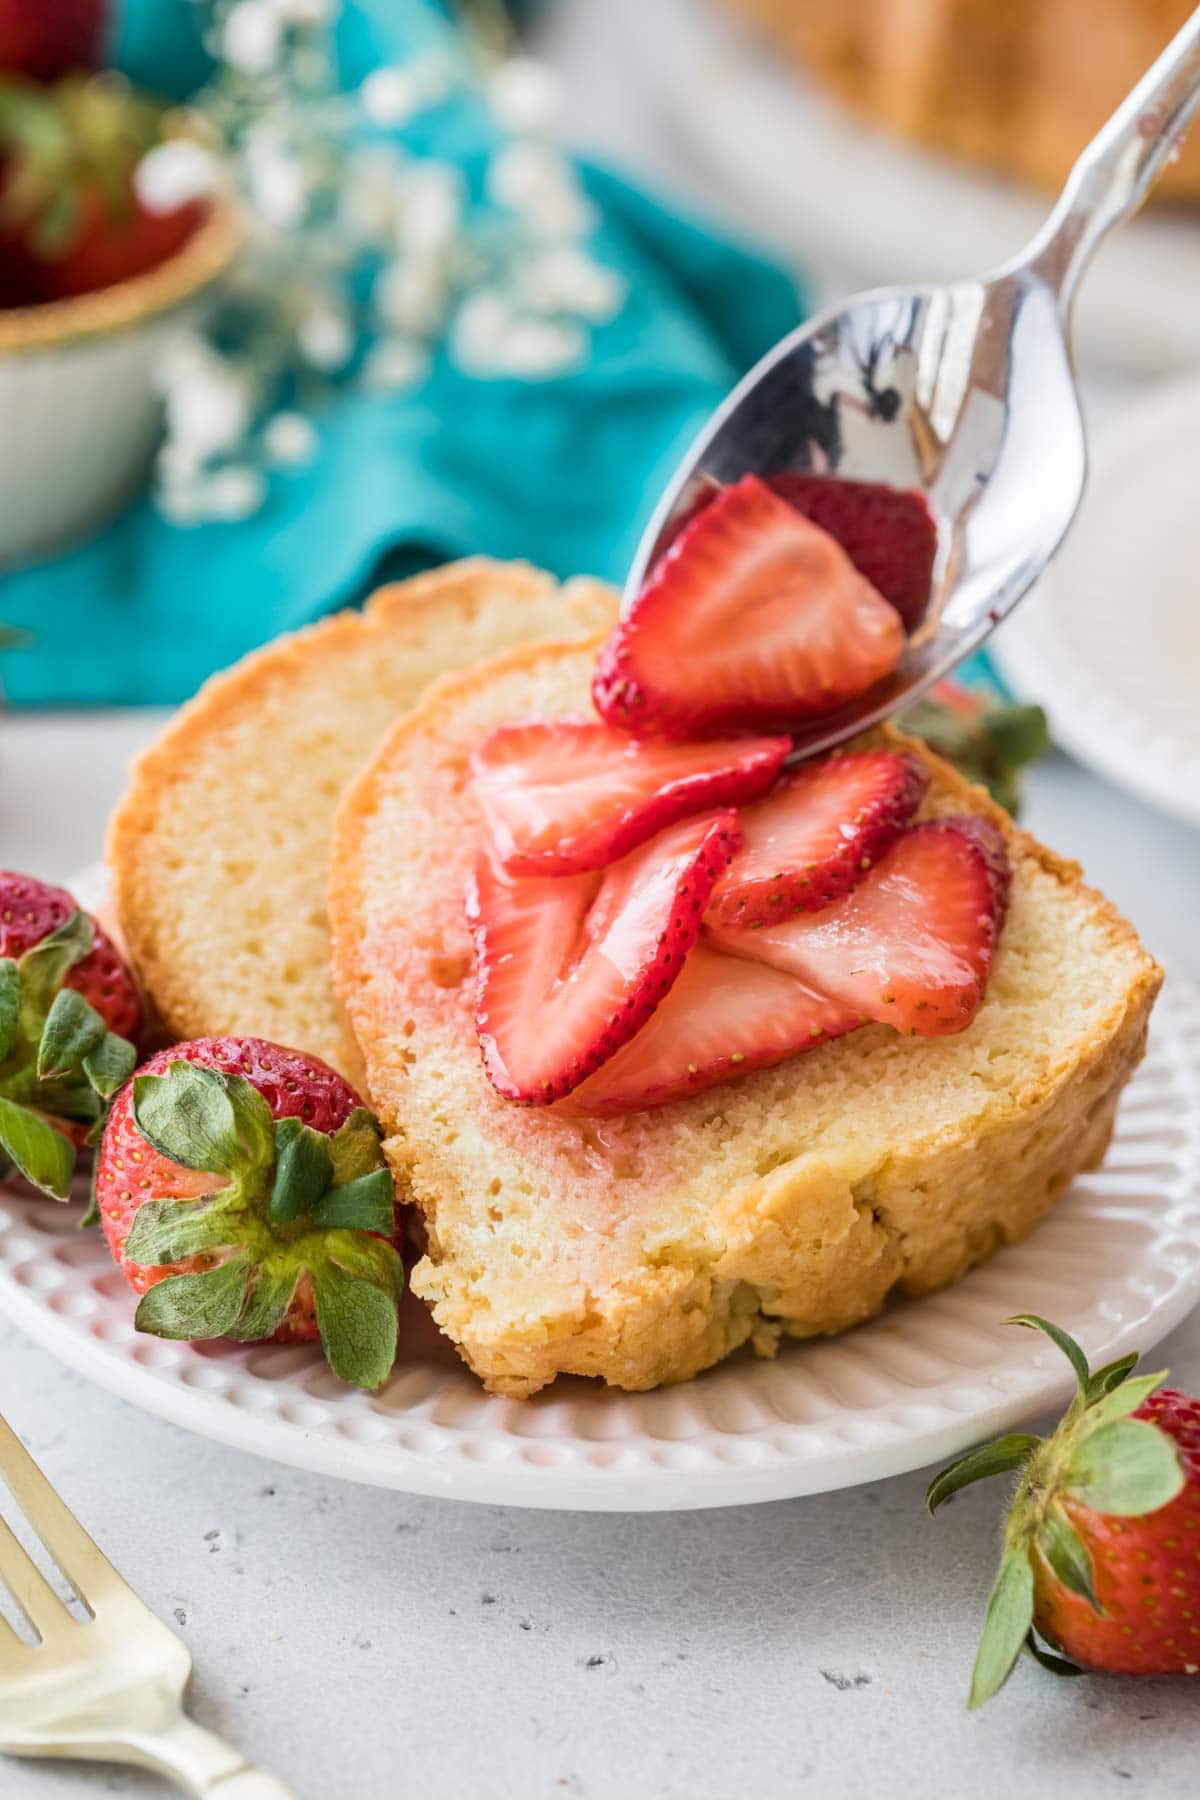 macerated strawberries being spooned onto two slices of cake on a white plate